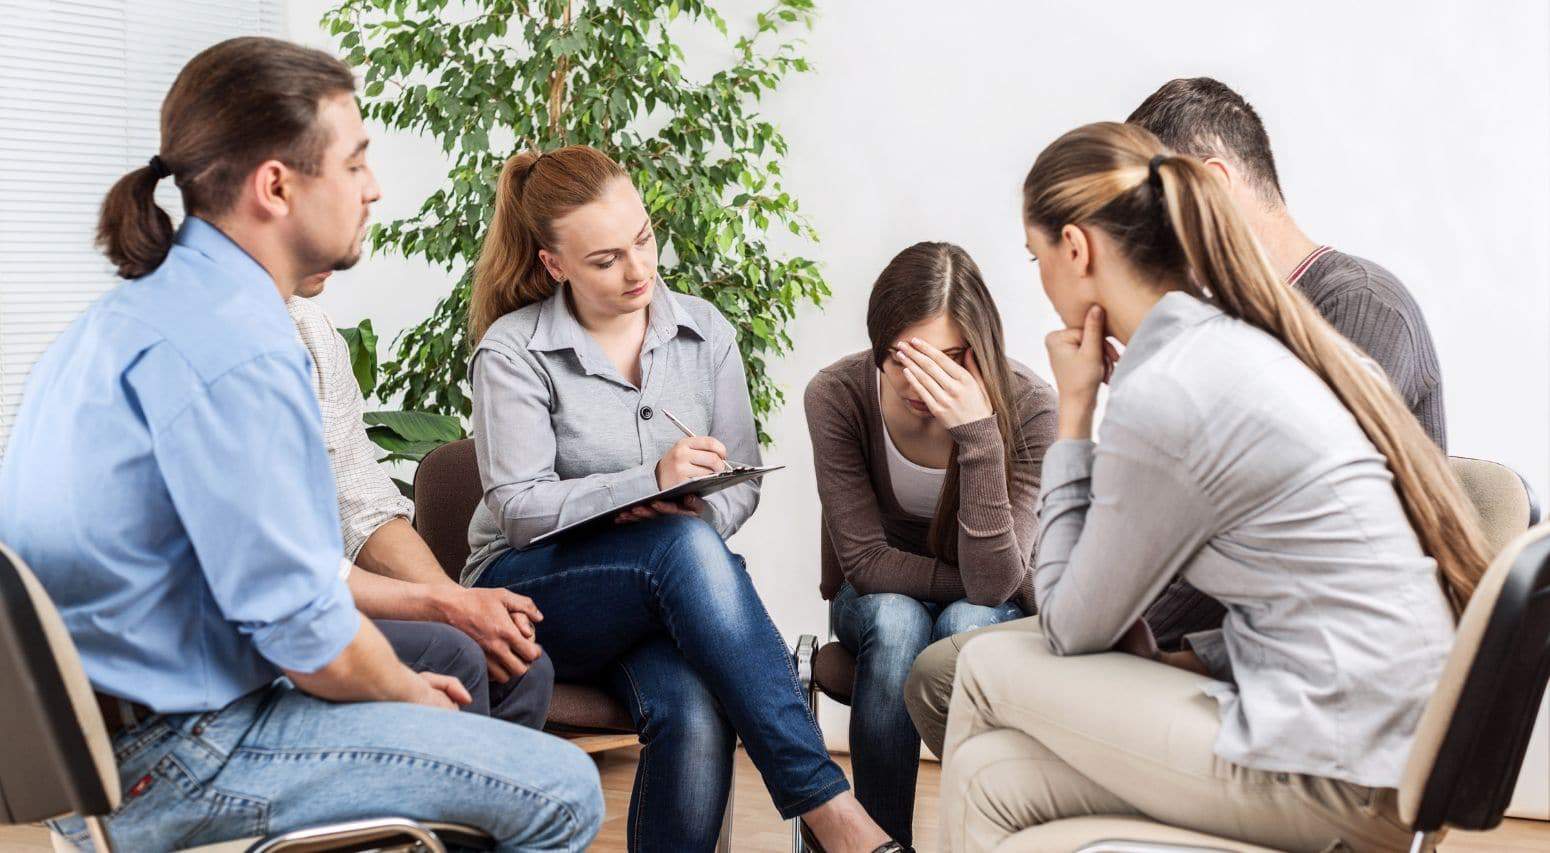 group therapy in alcohol rehab